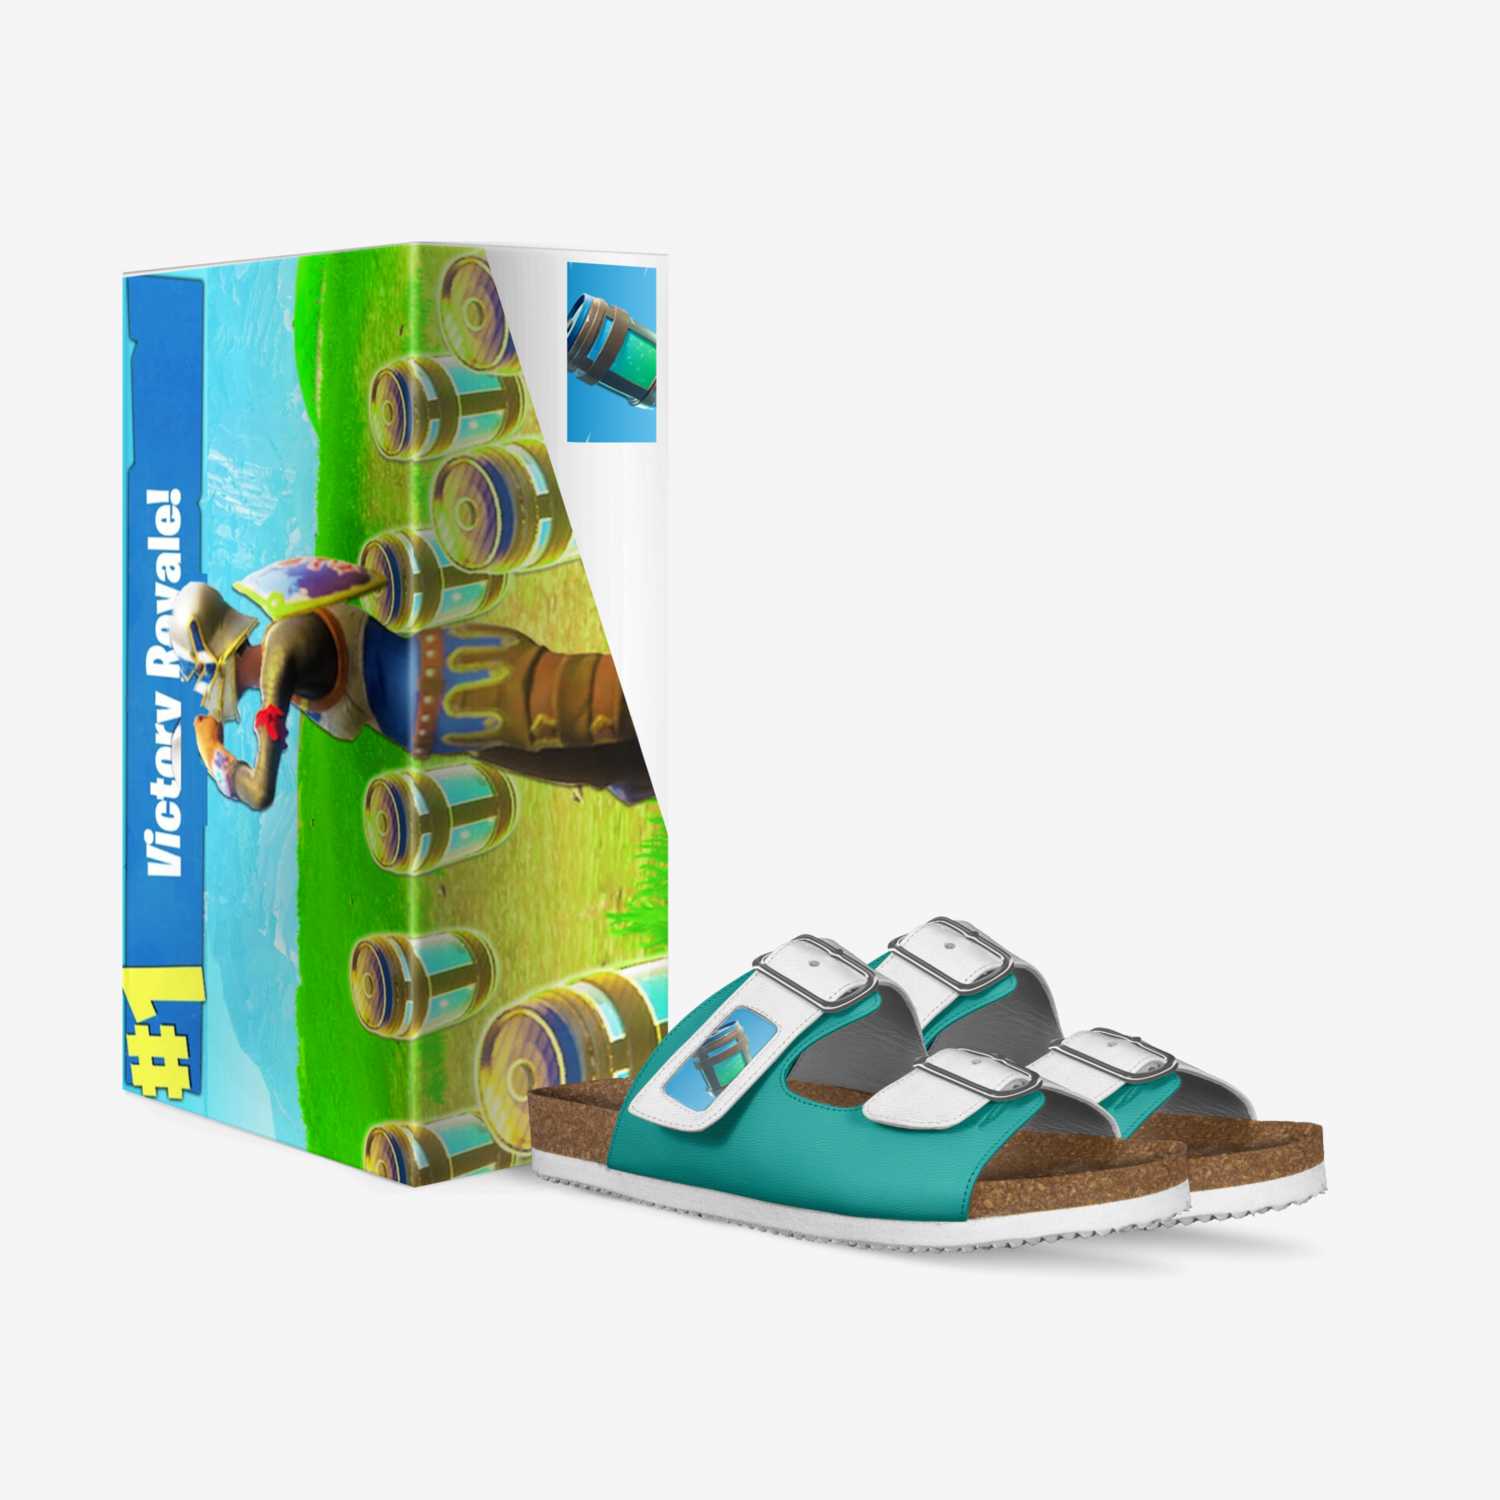 Fortnite Slides LE custom made in Italy shoes by Javion Harris | Box view